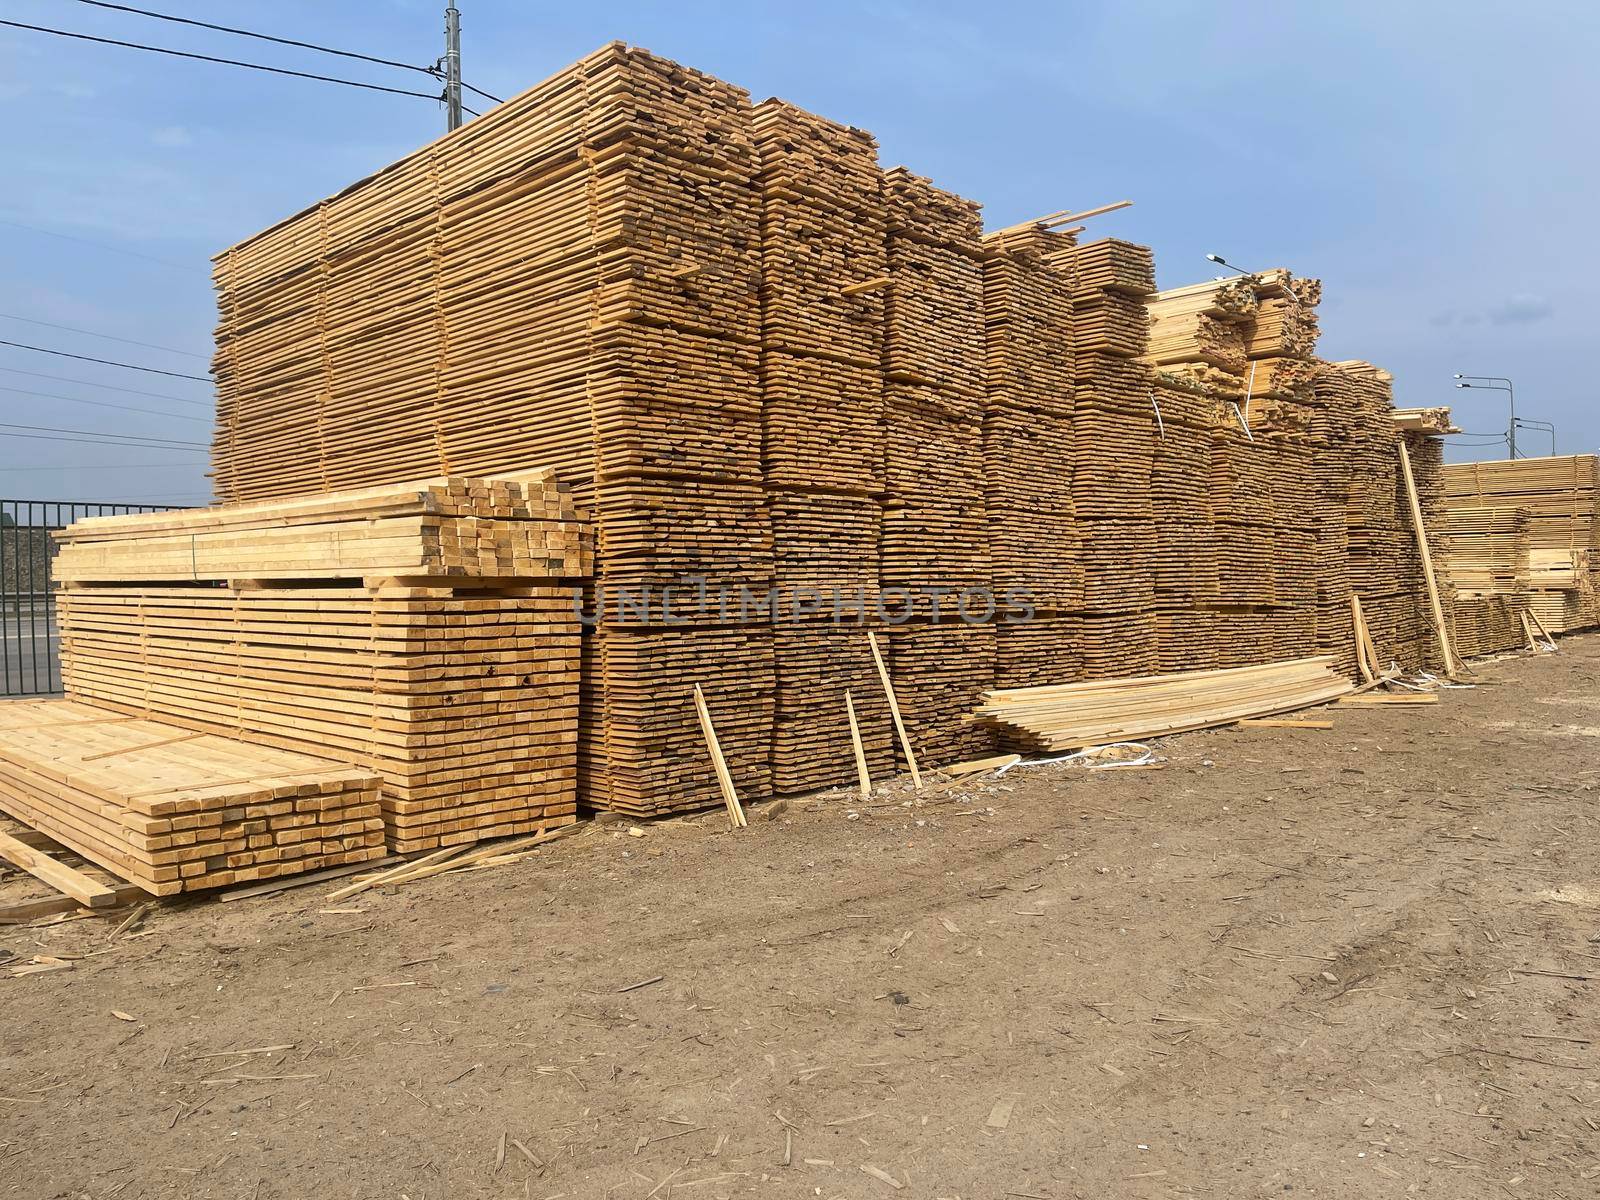 Wooden boards, lumber, industrial wood, timber. Pine wood timber stack of natural rough wooden boards on building site. Industrial timber building materials by epidemiks